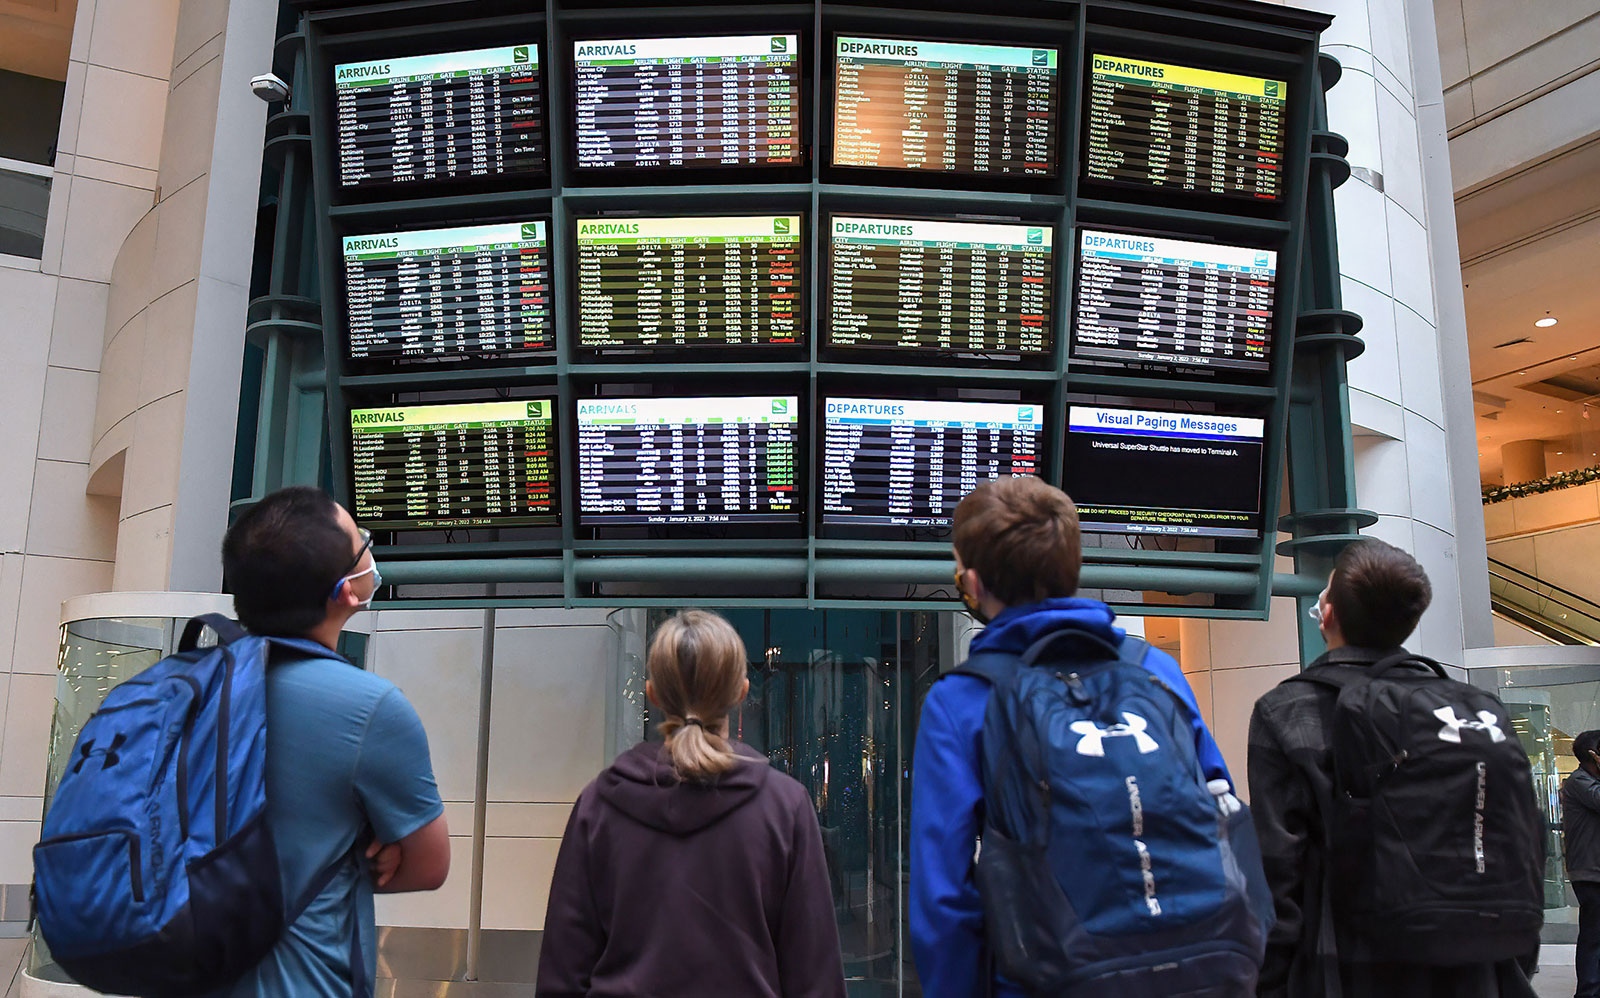 Travelers look at a board showing delayed and cancelled flights at Orlando International Airport on January 2. Nearly 18,000 flights have been cancelled since December 24.